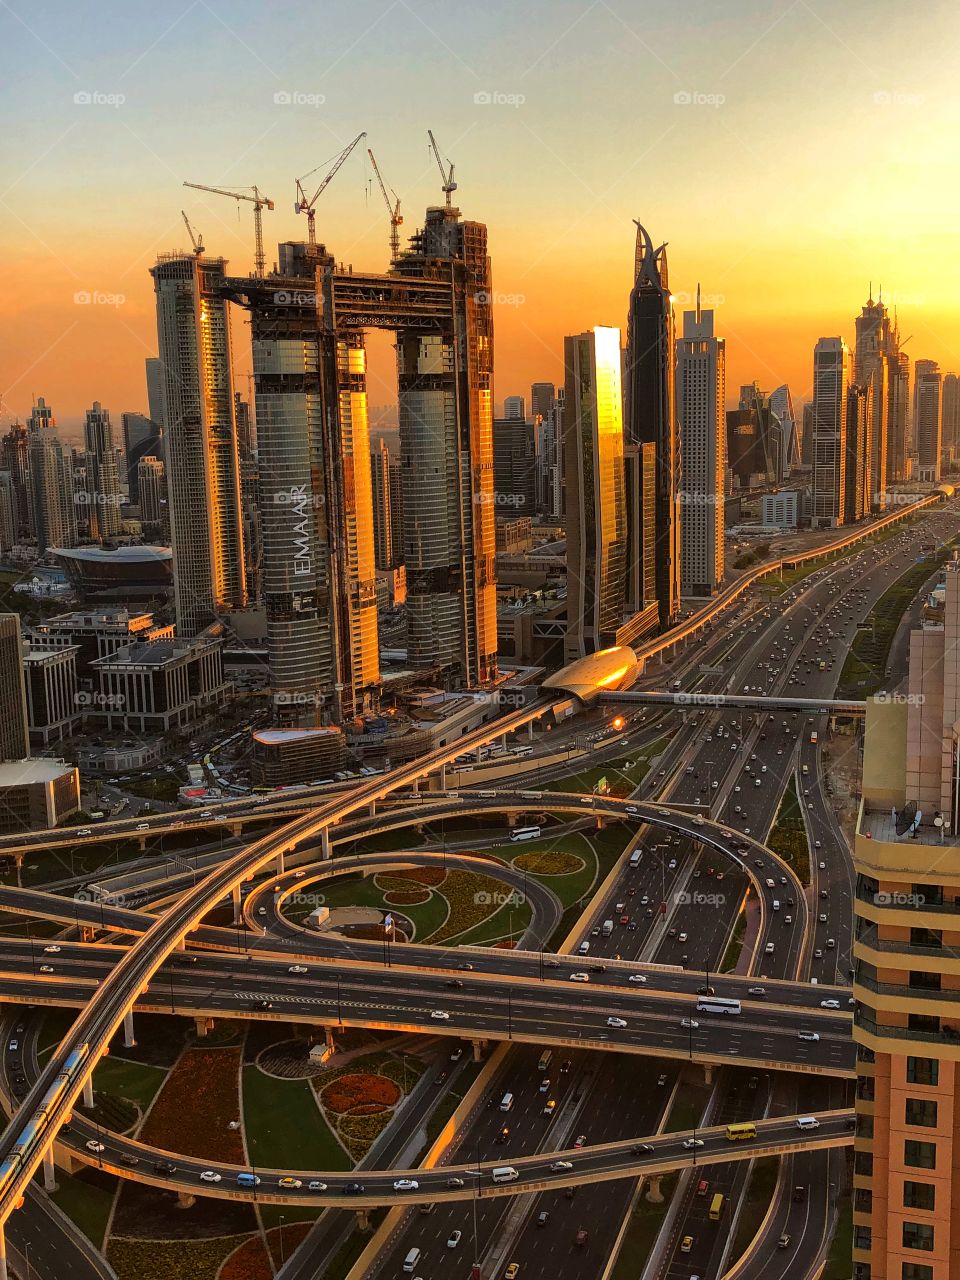 A view of downtown Dubai! The modern architecture illuminated by the evening sunset gives the city a magical glow! 